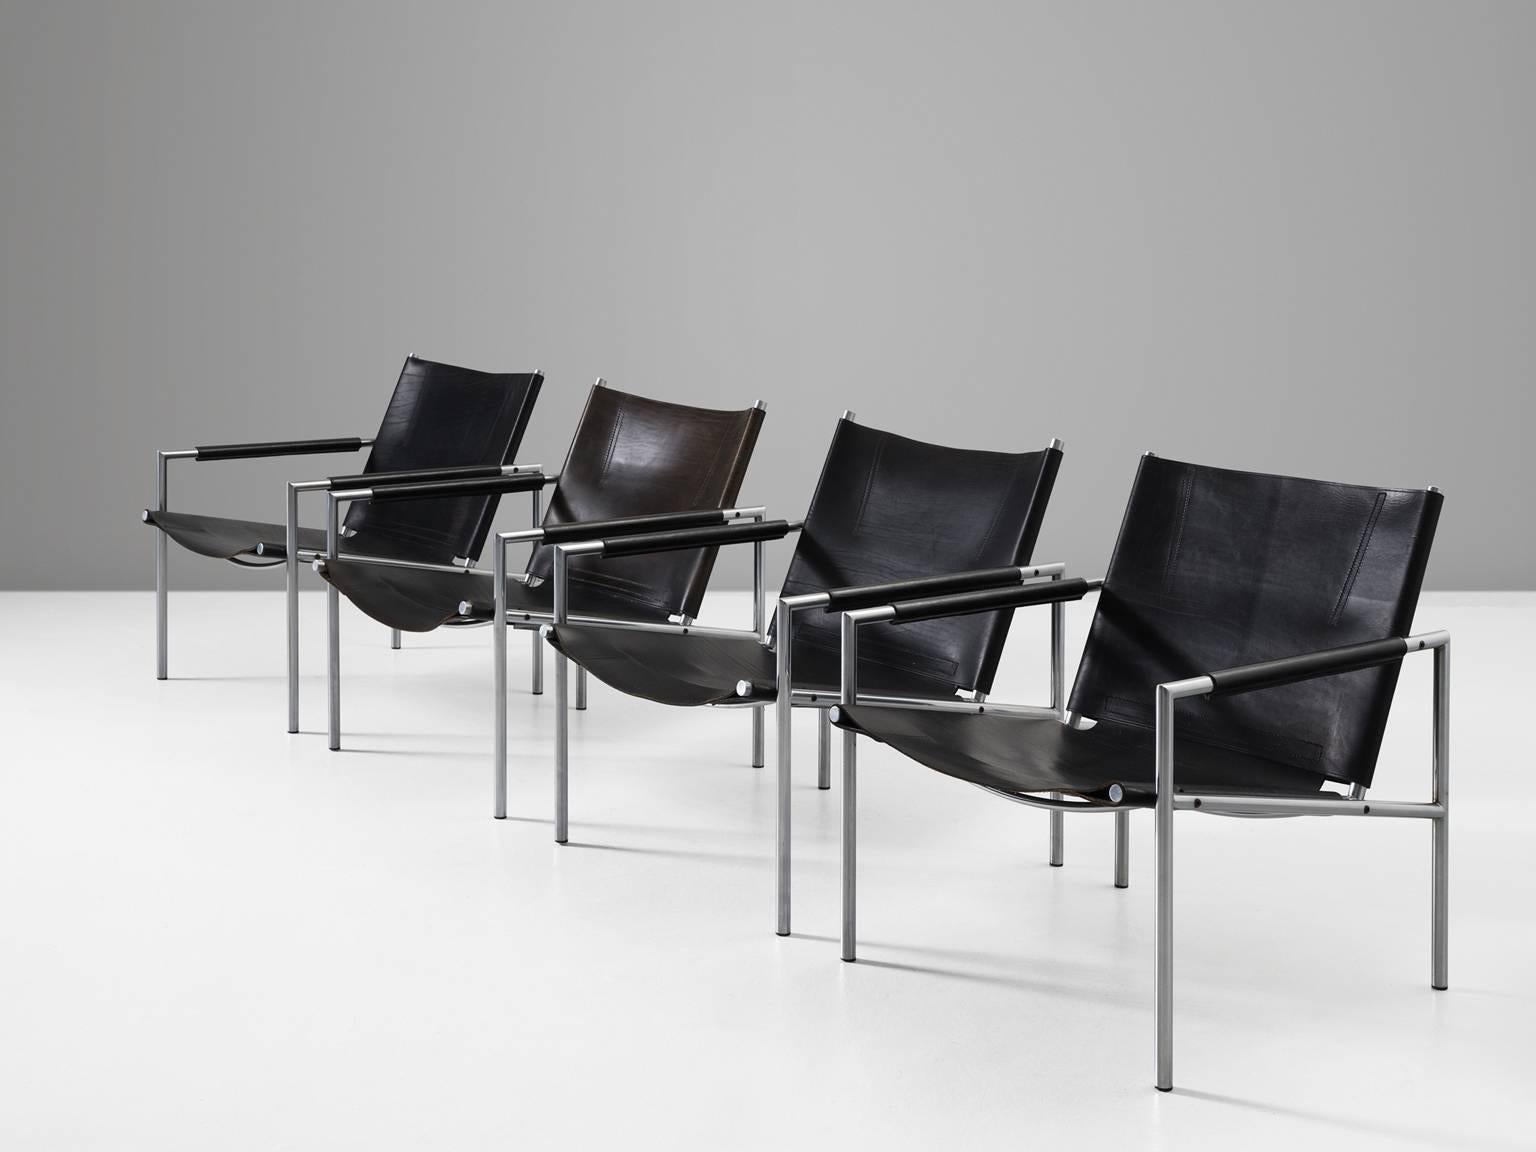 Set of four armchairs, in steel and leather by Martin Visser for T-spectrum, the Netherlands, 1965. 

Set of four modern easy chairs made of a tubular brushed steel, which is in nice contrast with the high-quality black leather upholstery. The